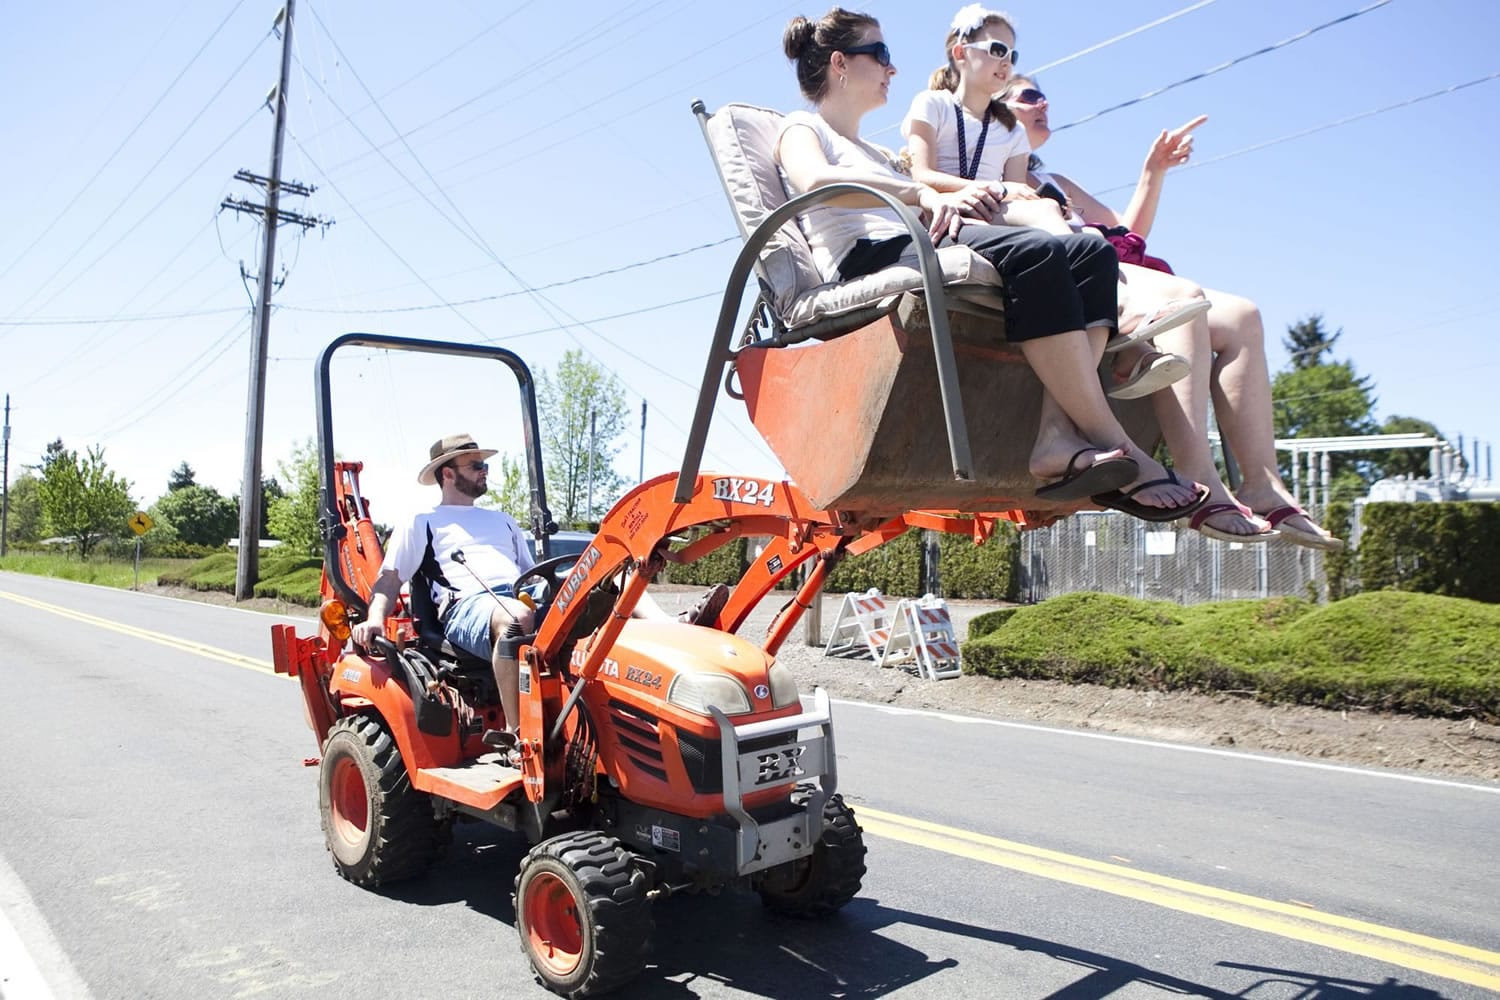 Rob Anderson sits back in his tractor seat after hoisting his wife, Cori (far right), his daughter Trista (middle) and their friend Carmen Geotschuis into the air to get a good view of the Hockinson Fun Days parade Saturday afternoon.